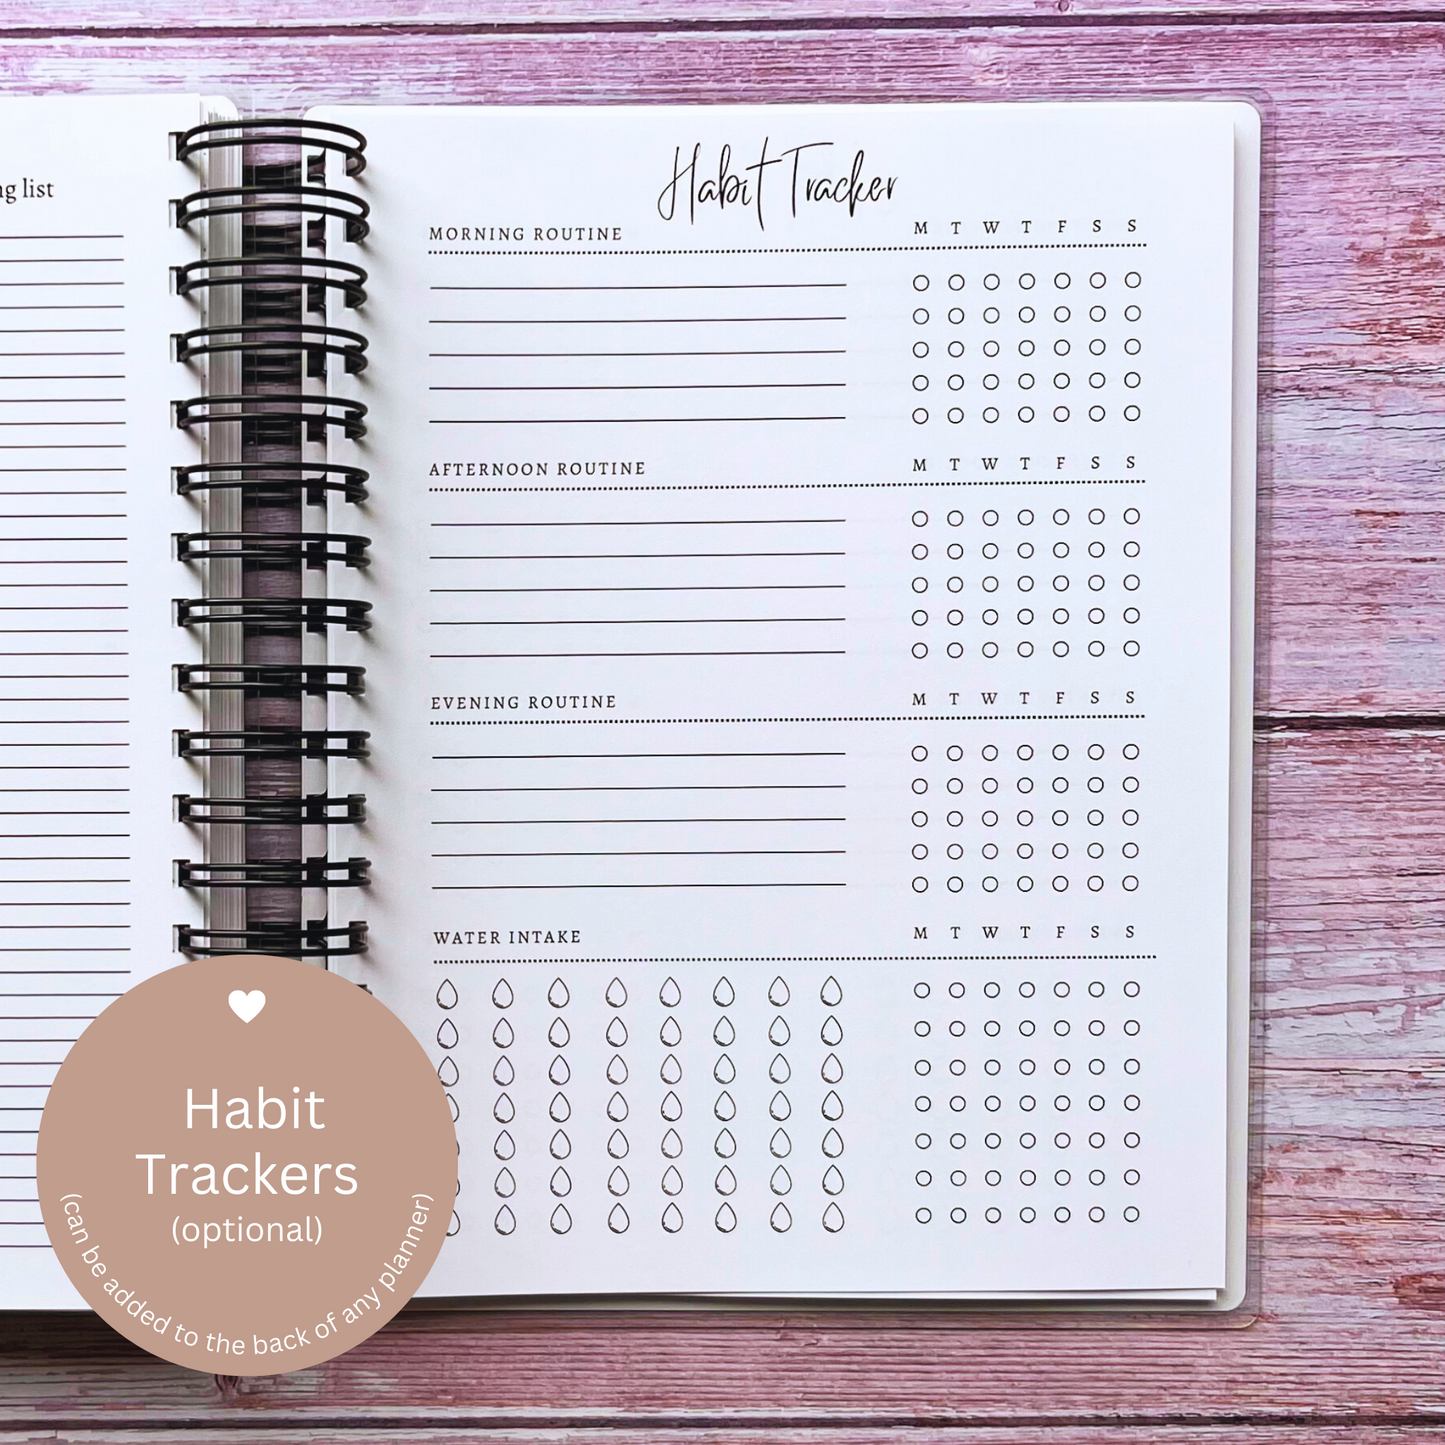 Personalized Weekly Planner | Relax Refresh Renew